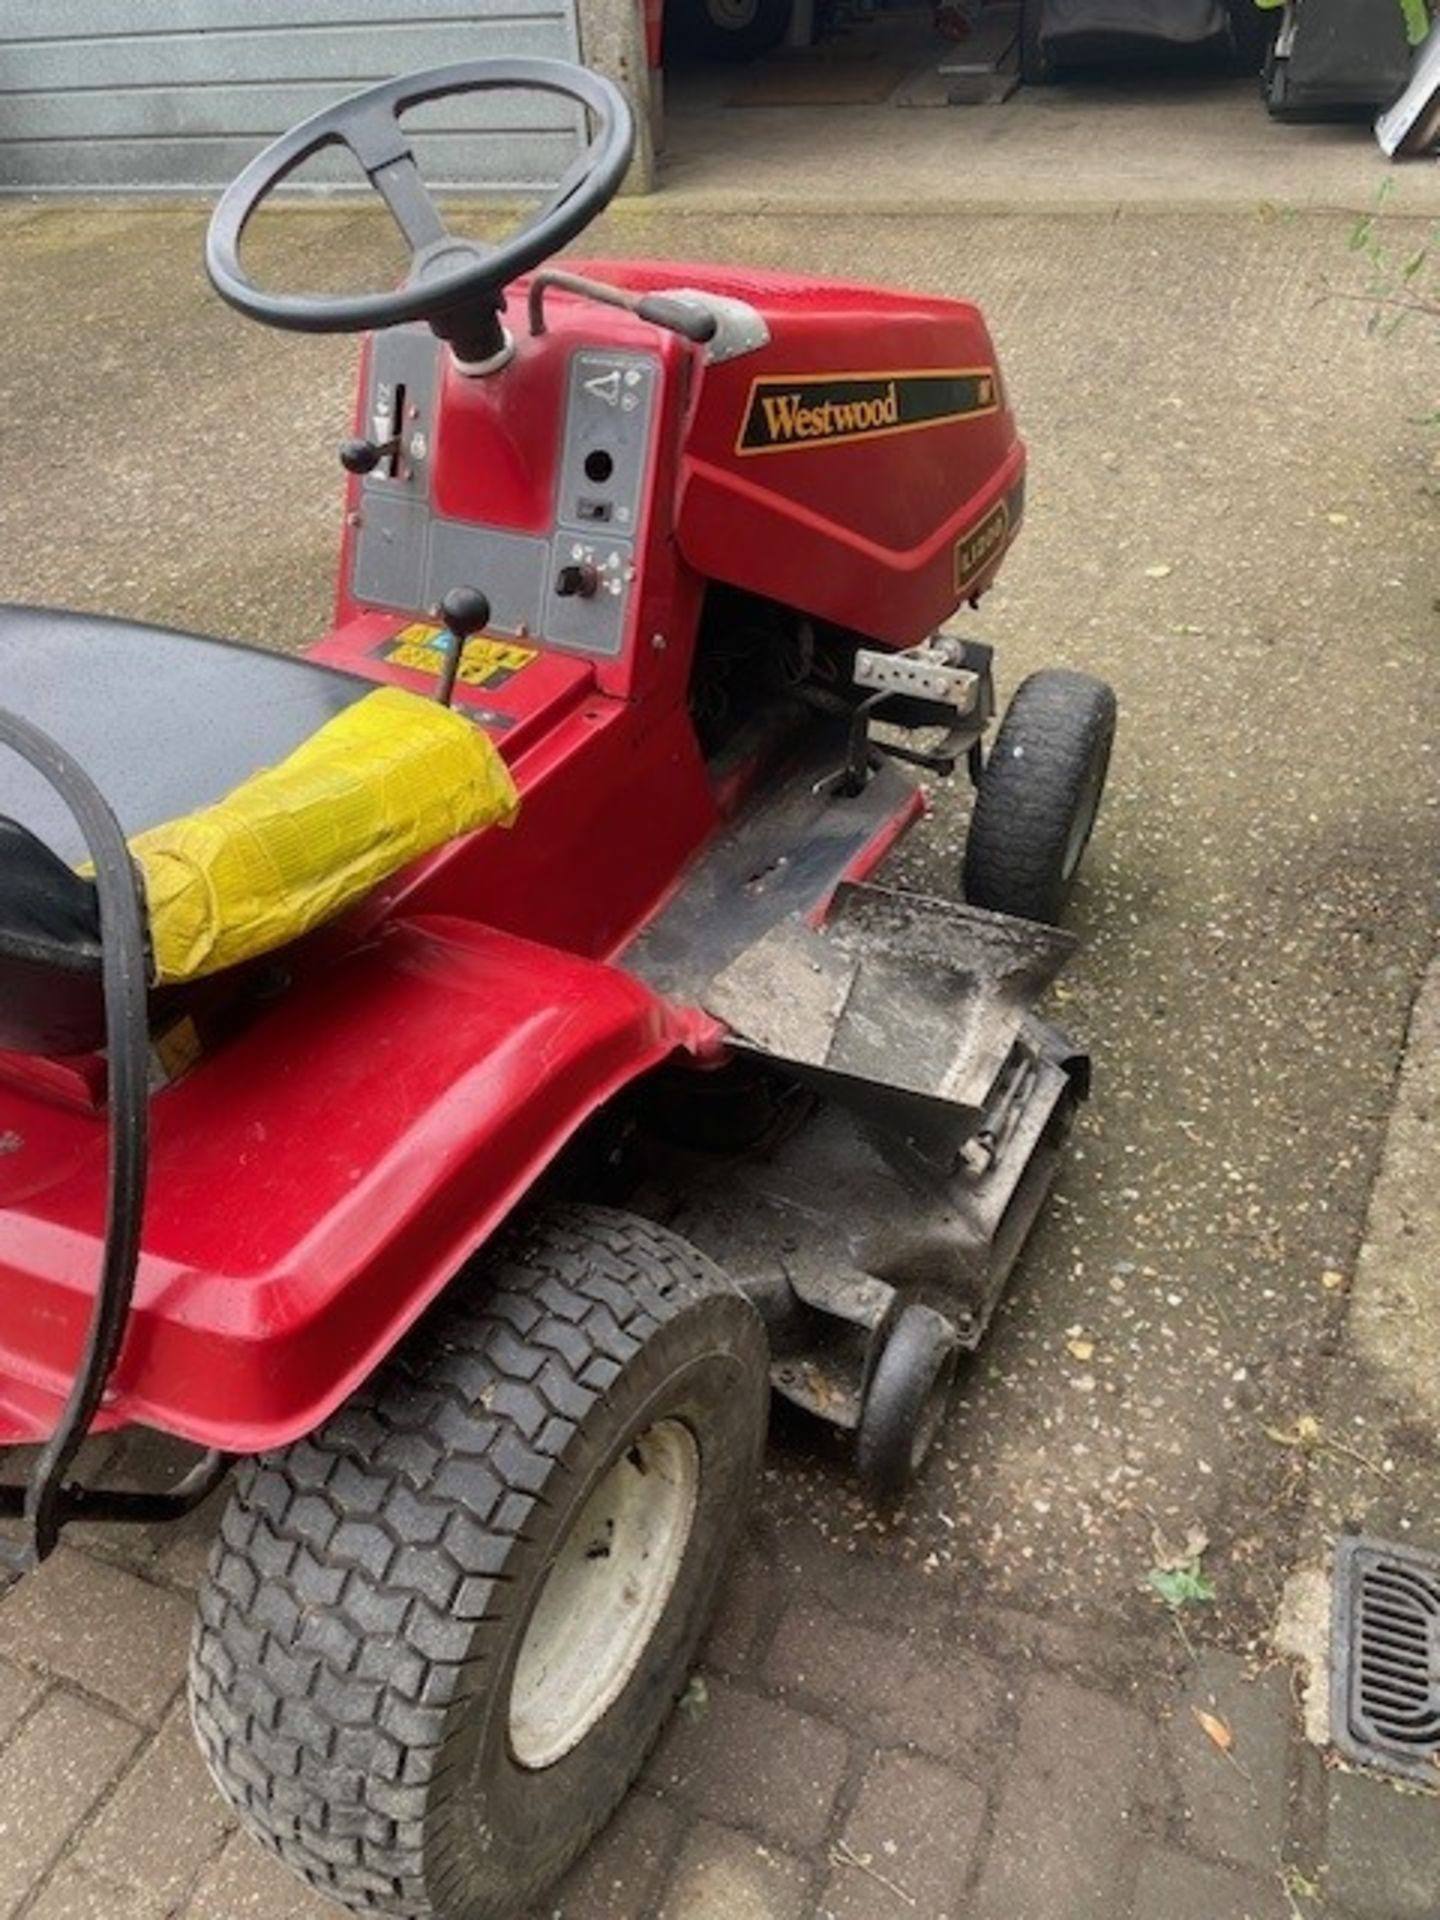 Westwood ride on lawnmower L1200 with grass collector - Image 4 of 4